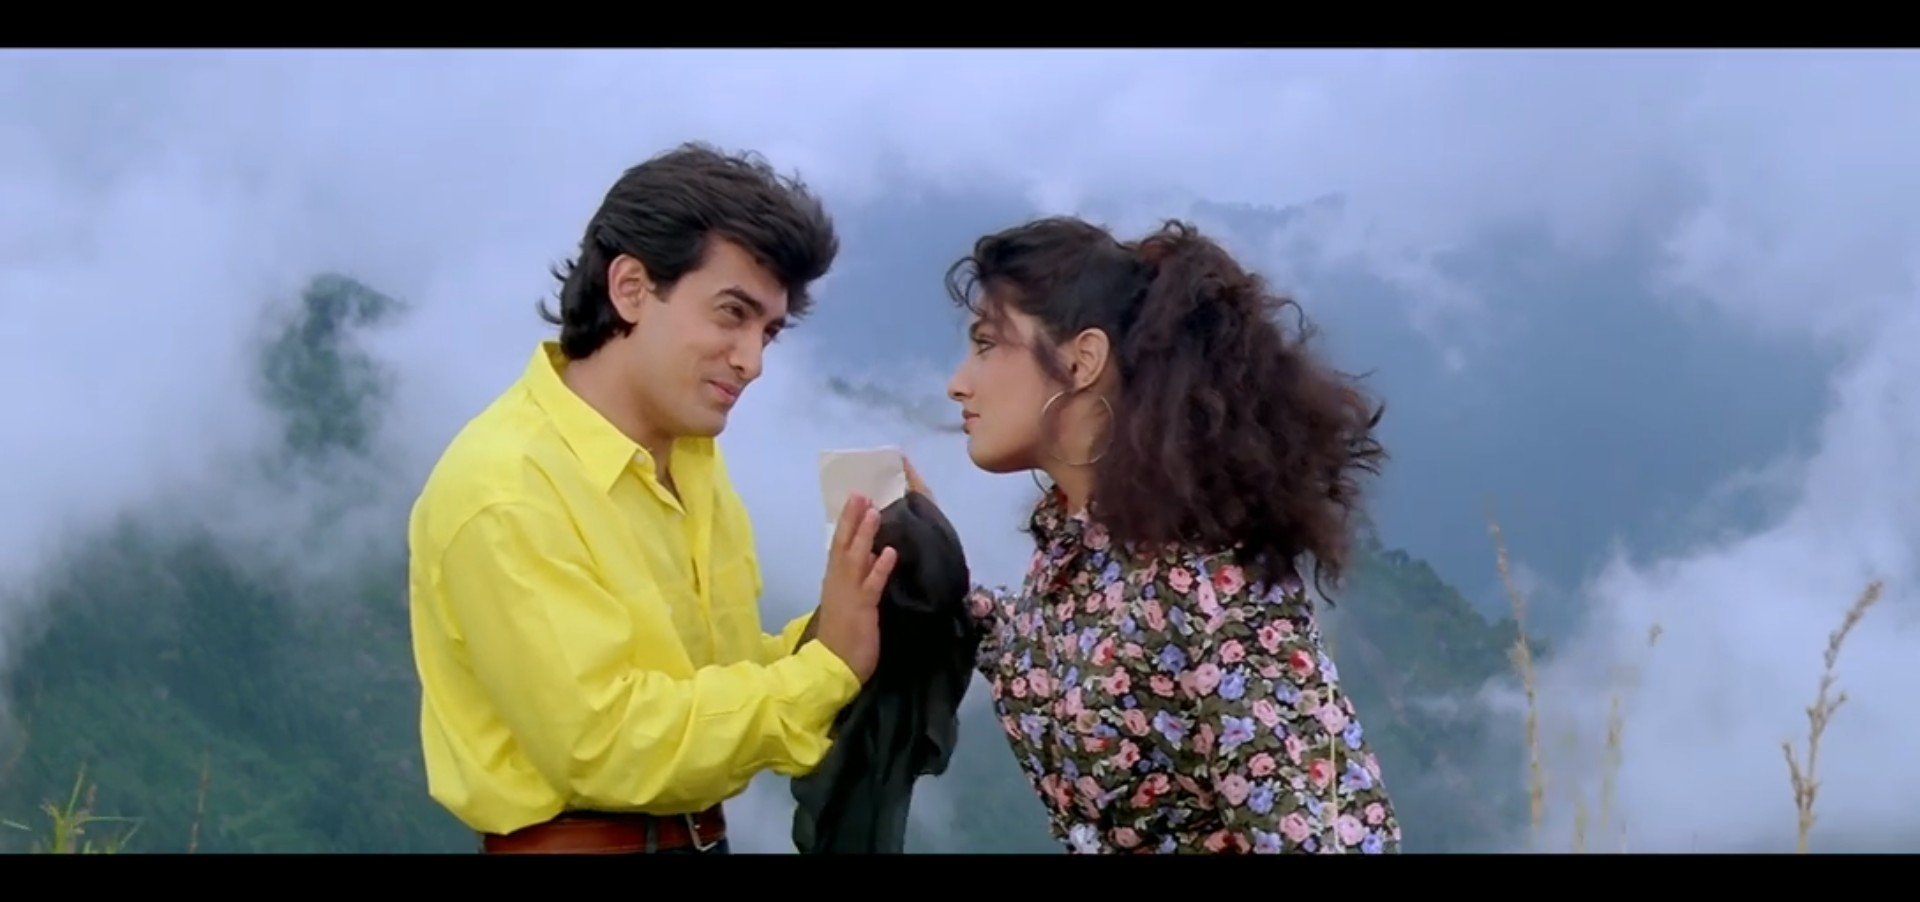 Amar laughing while Raveena looks at him with fake annoyance